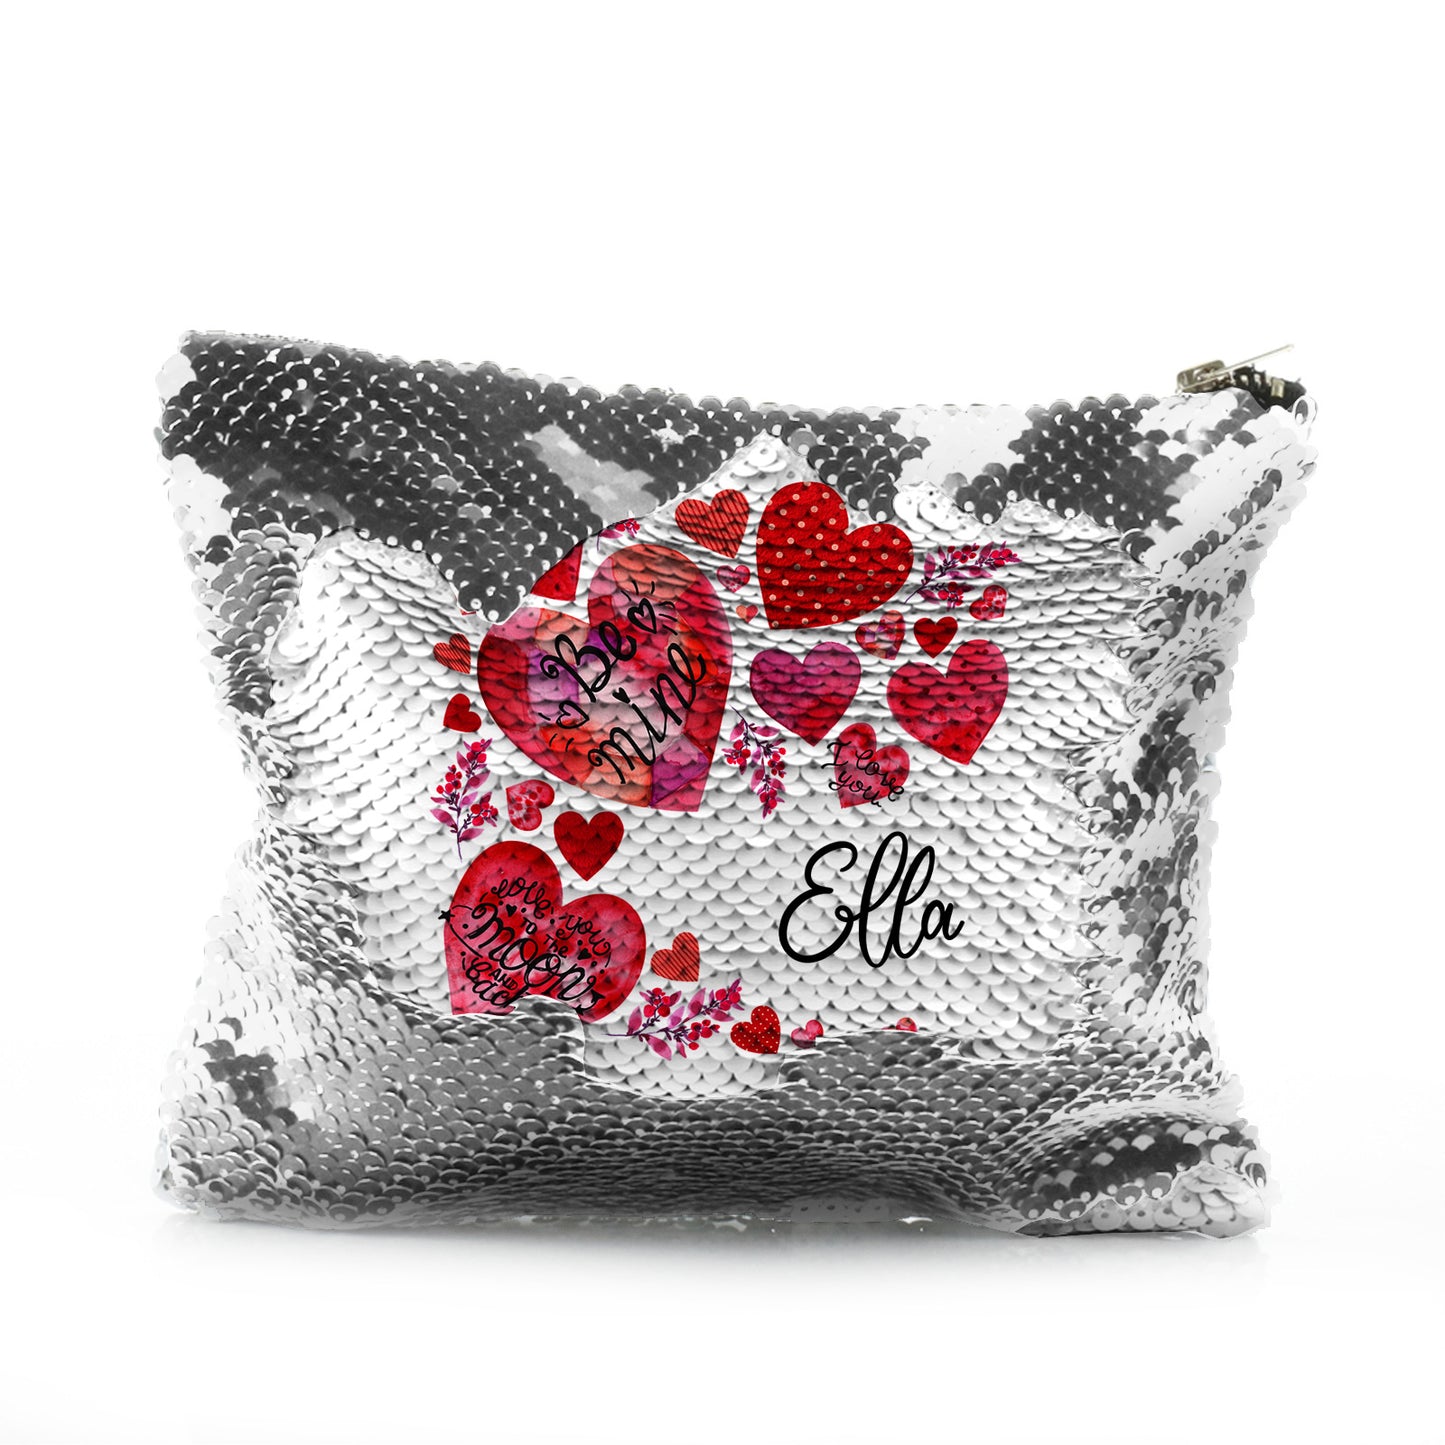 Personalised Sequin Zip Bag with Stylish Text and Material Hearts Love Message Print